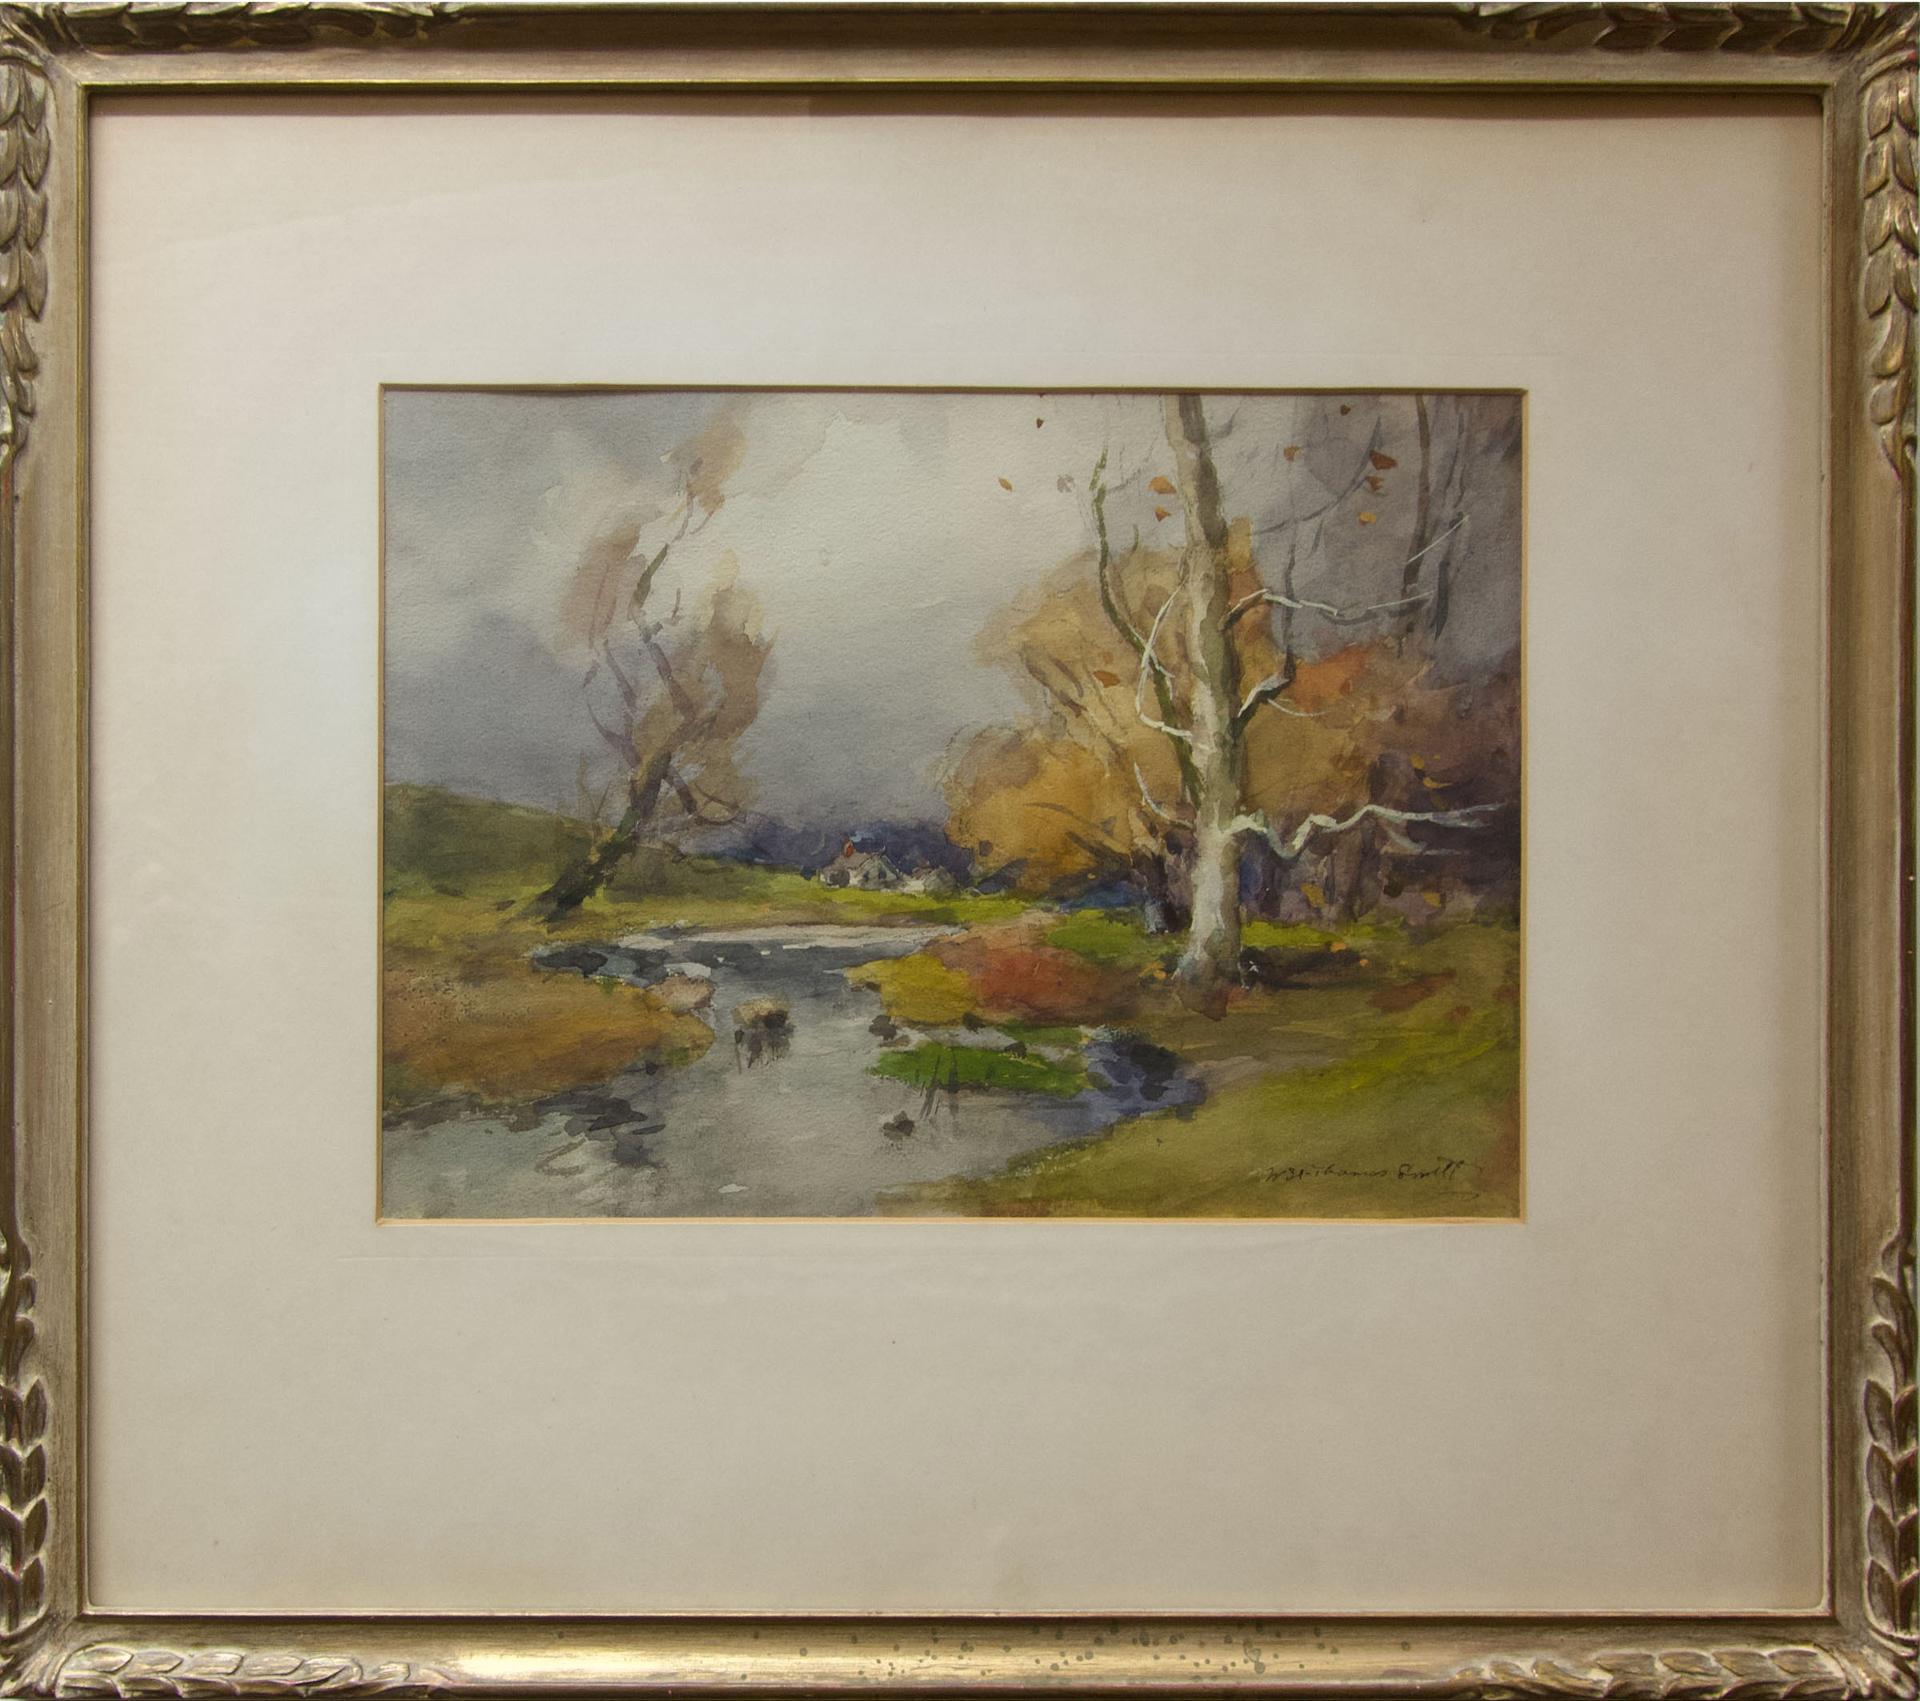 William St. Thomas Smith (1862-1947) - Untitled (Windy Fall Day)